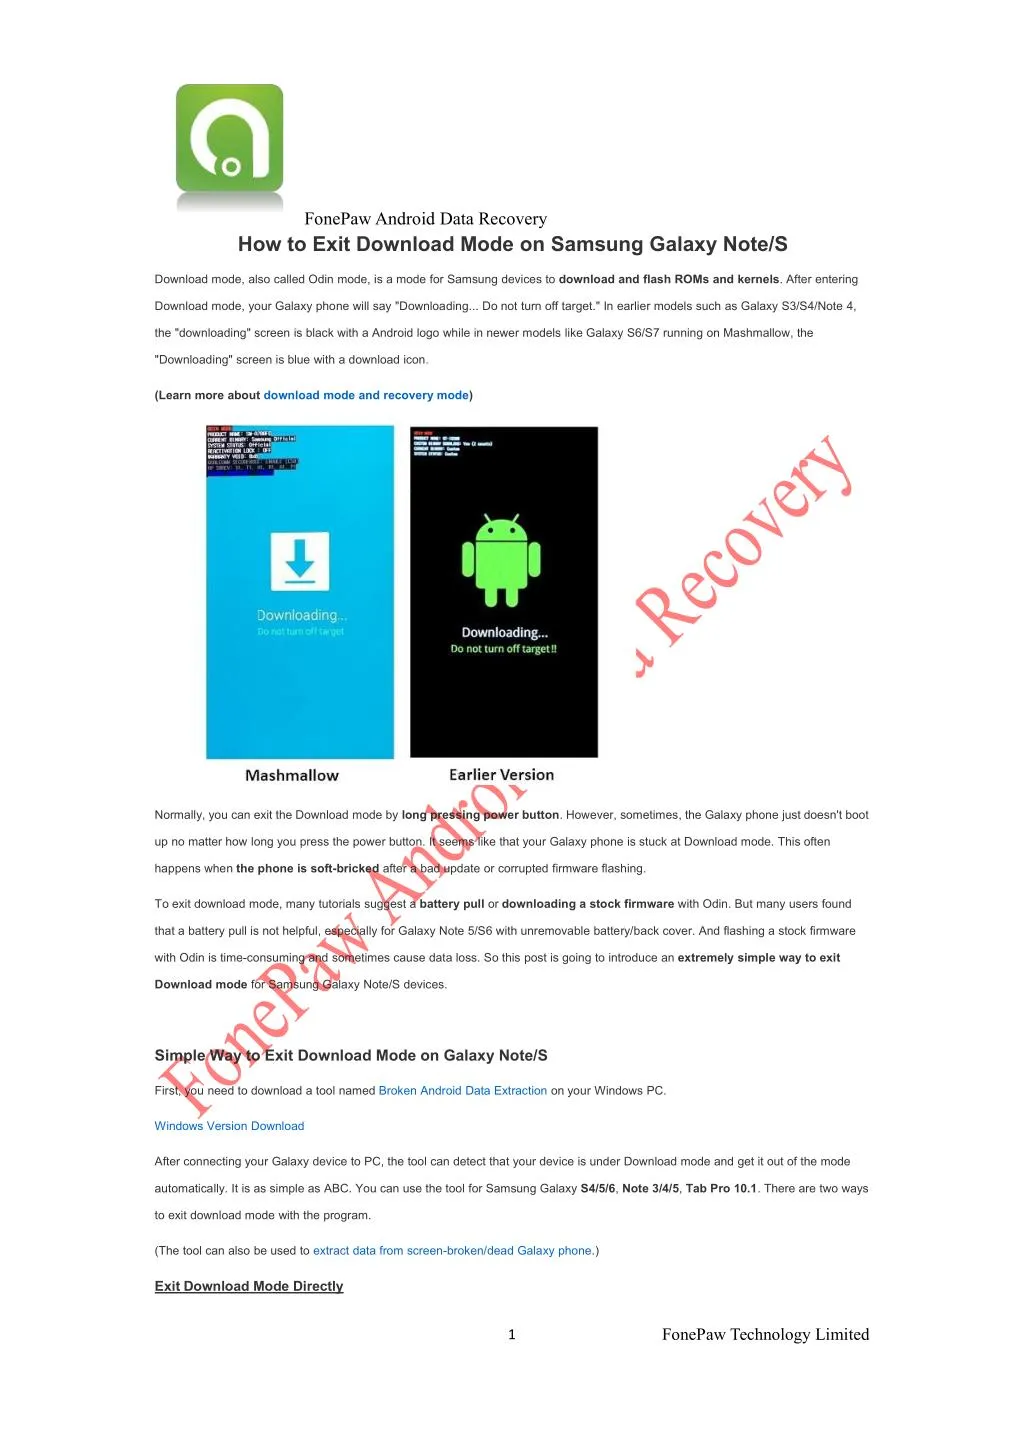 fonepawandroid data recovery how to exit download